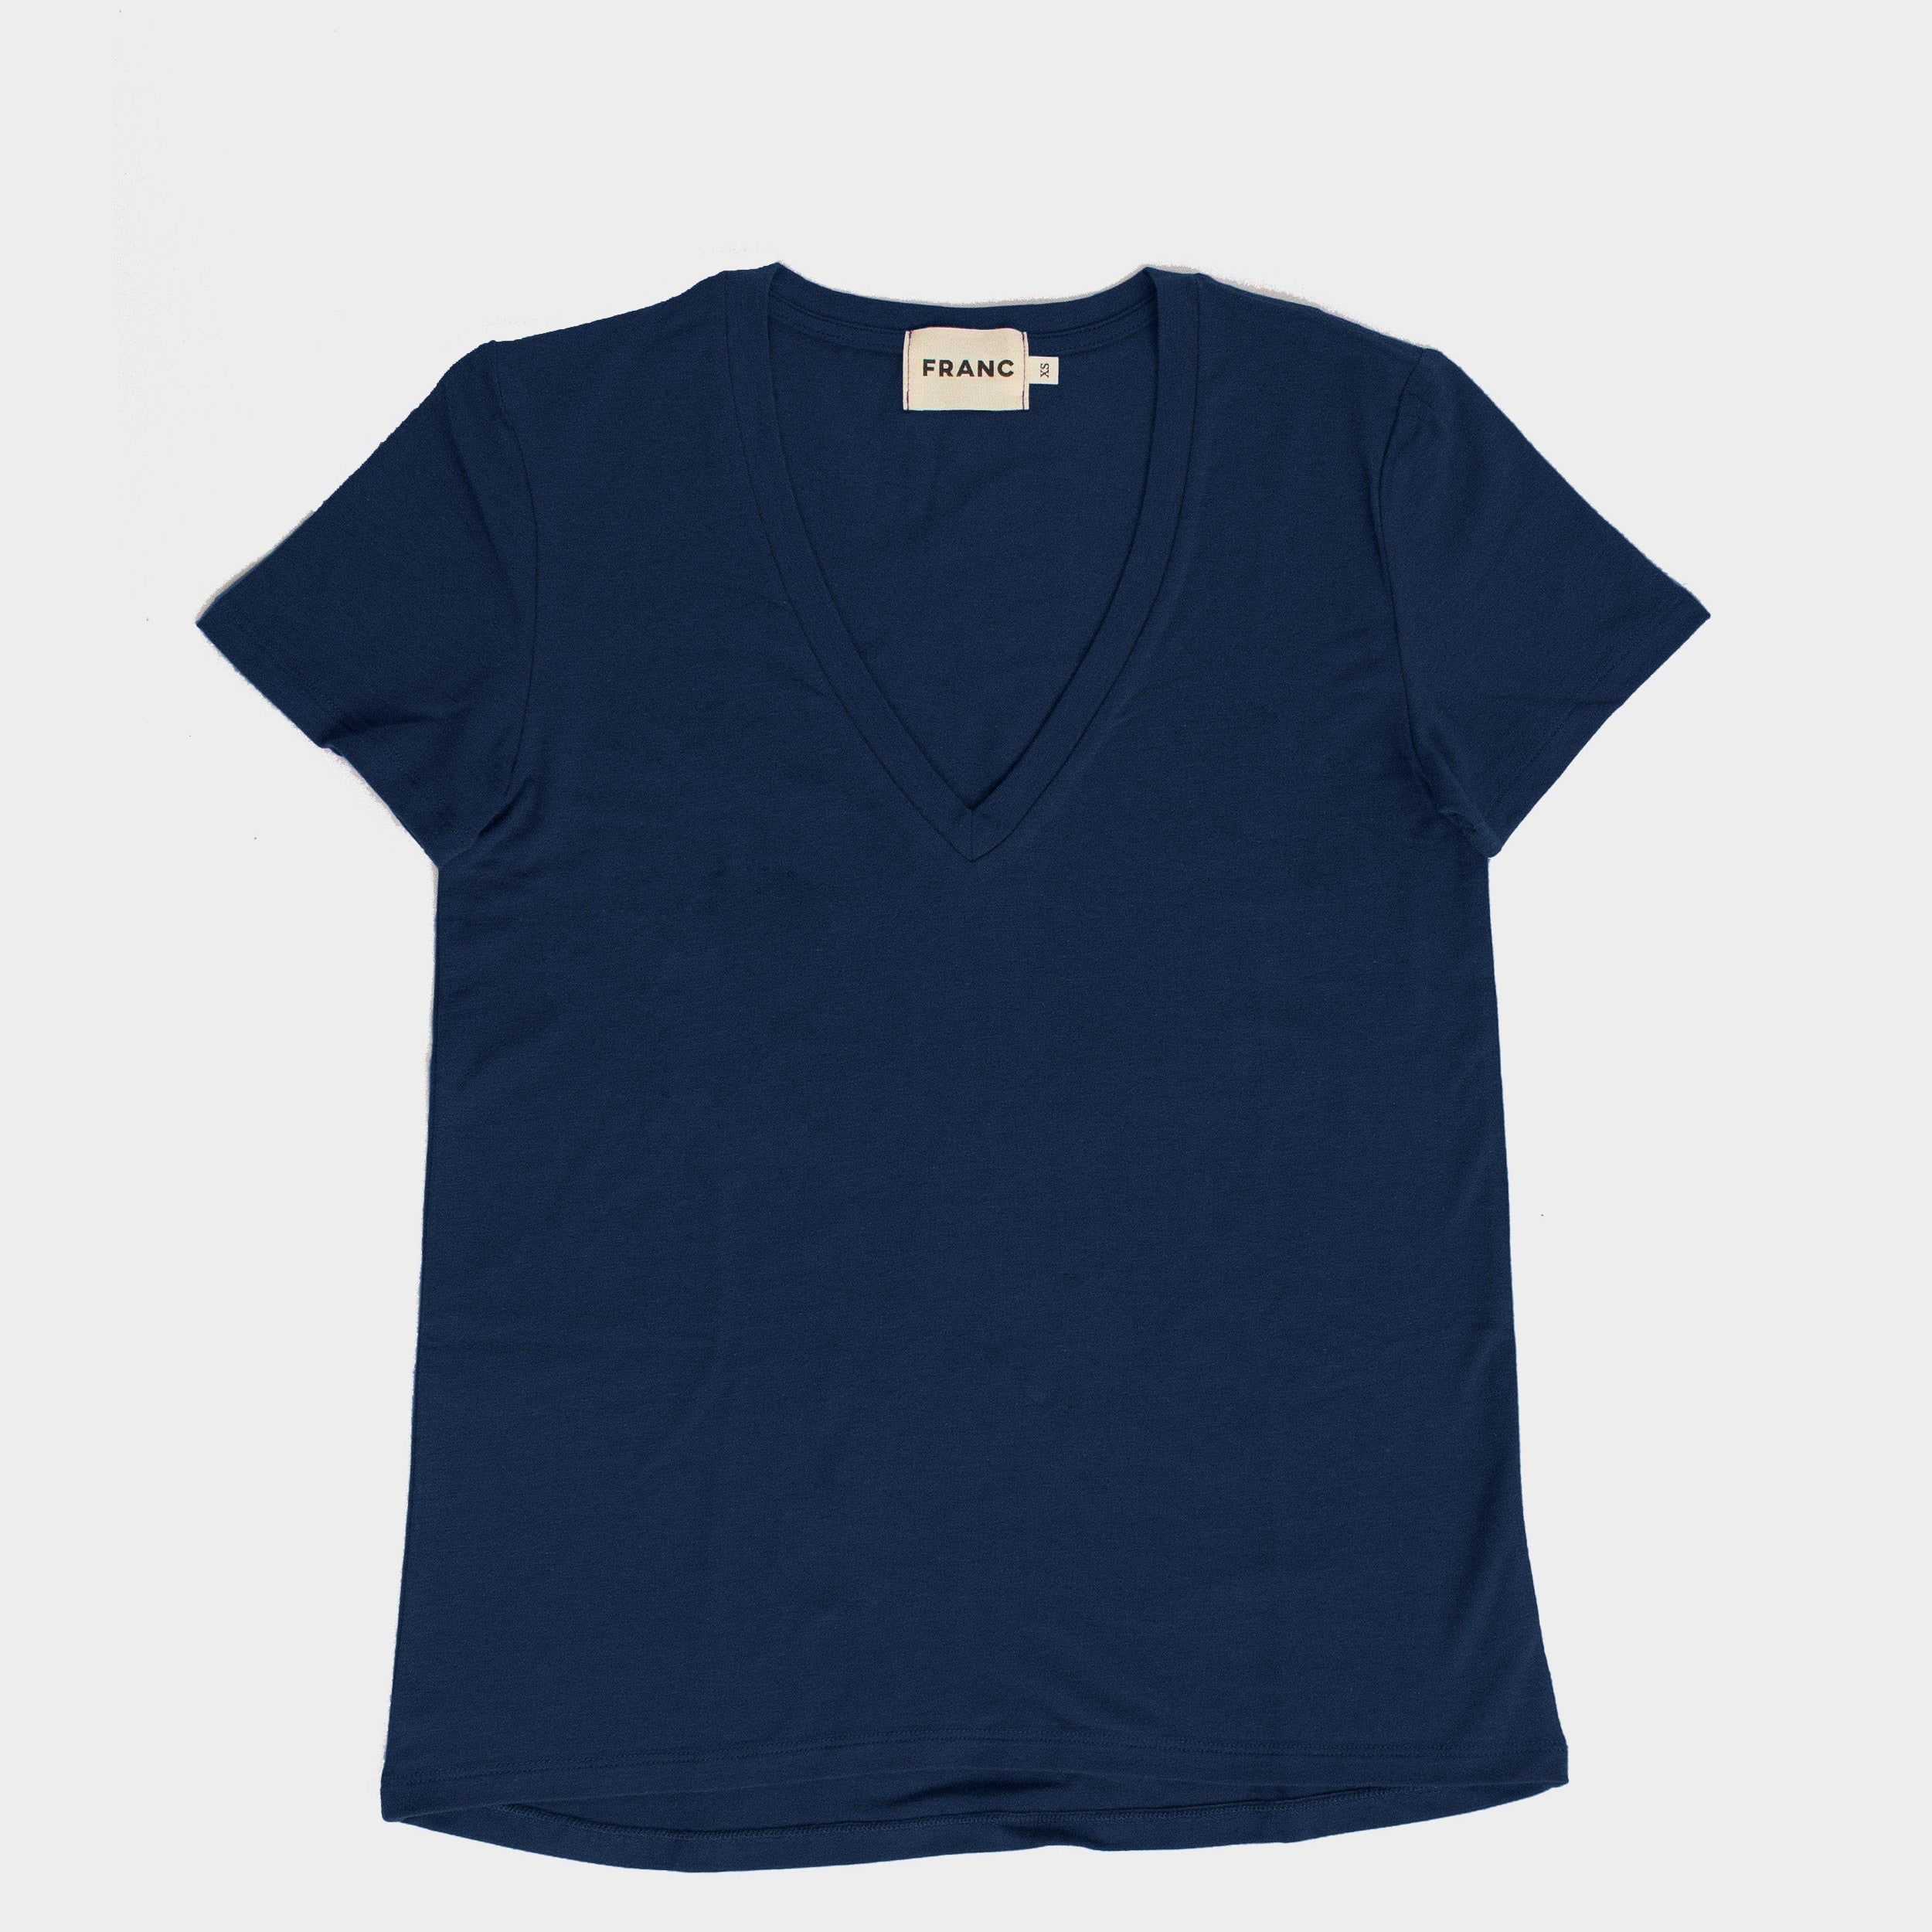 The V-Neck Tee in Admiral | FRANC Sustainable Clothing